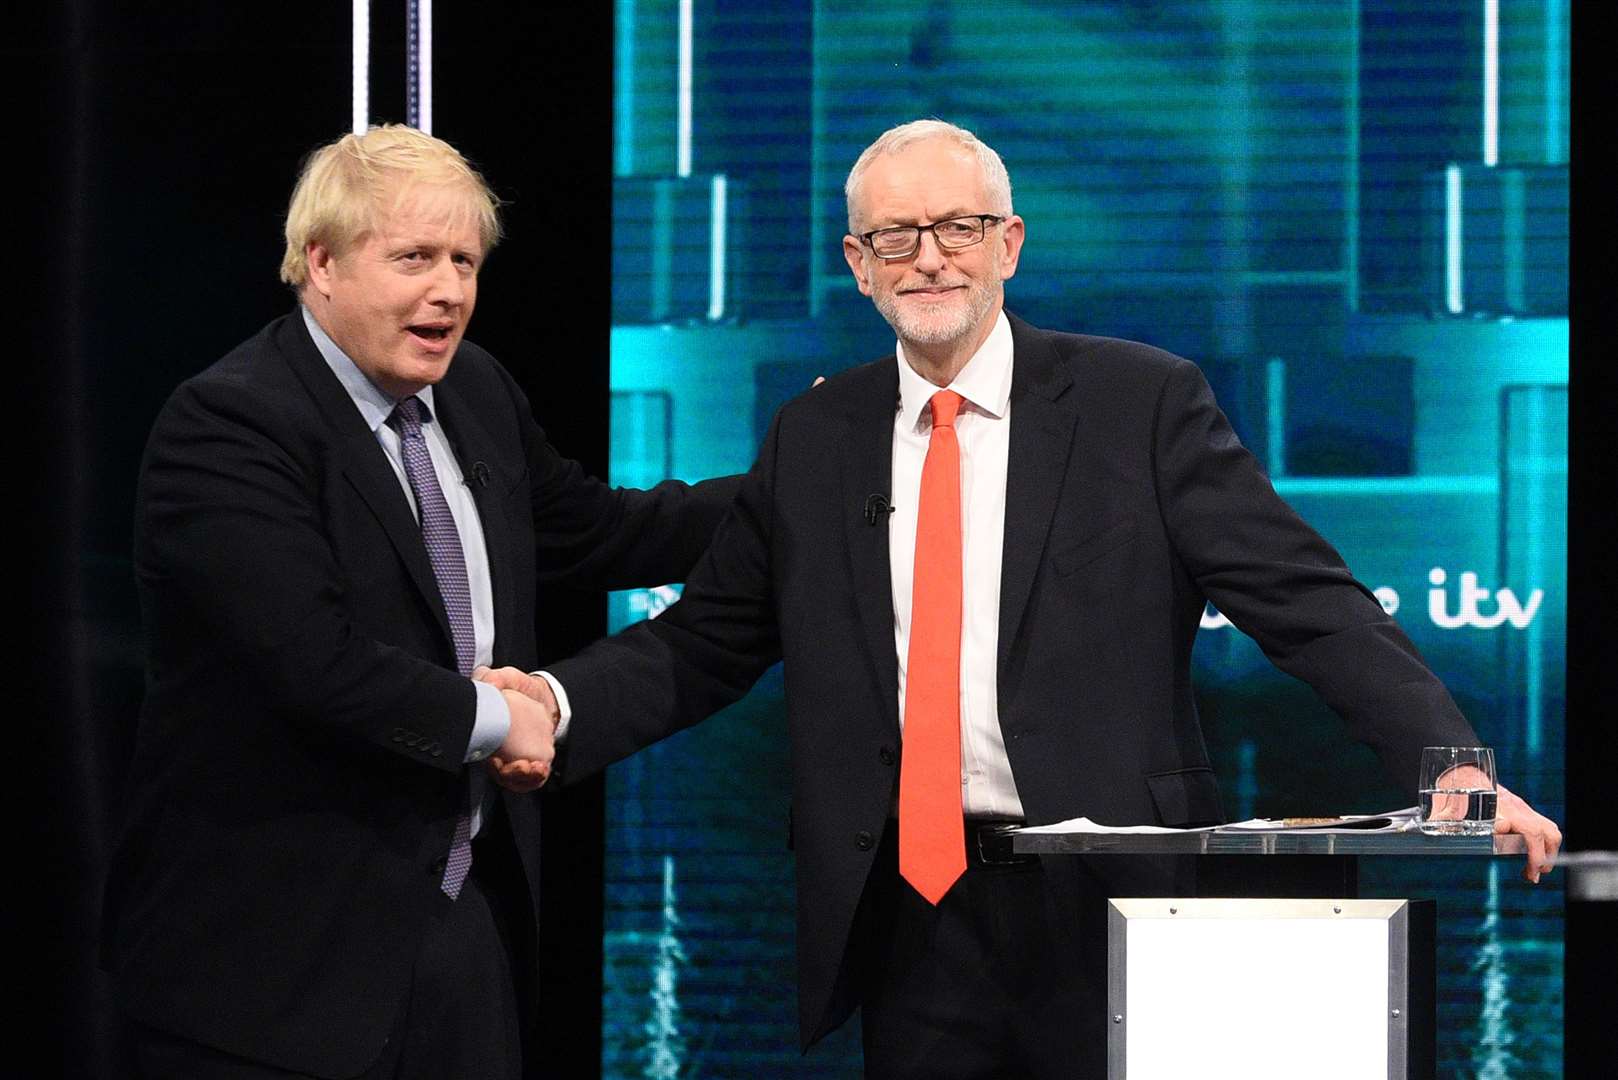 Boris Johnson (left) claimed victory and formed a government after the 2019 general election (ITV/PA)